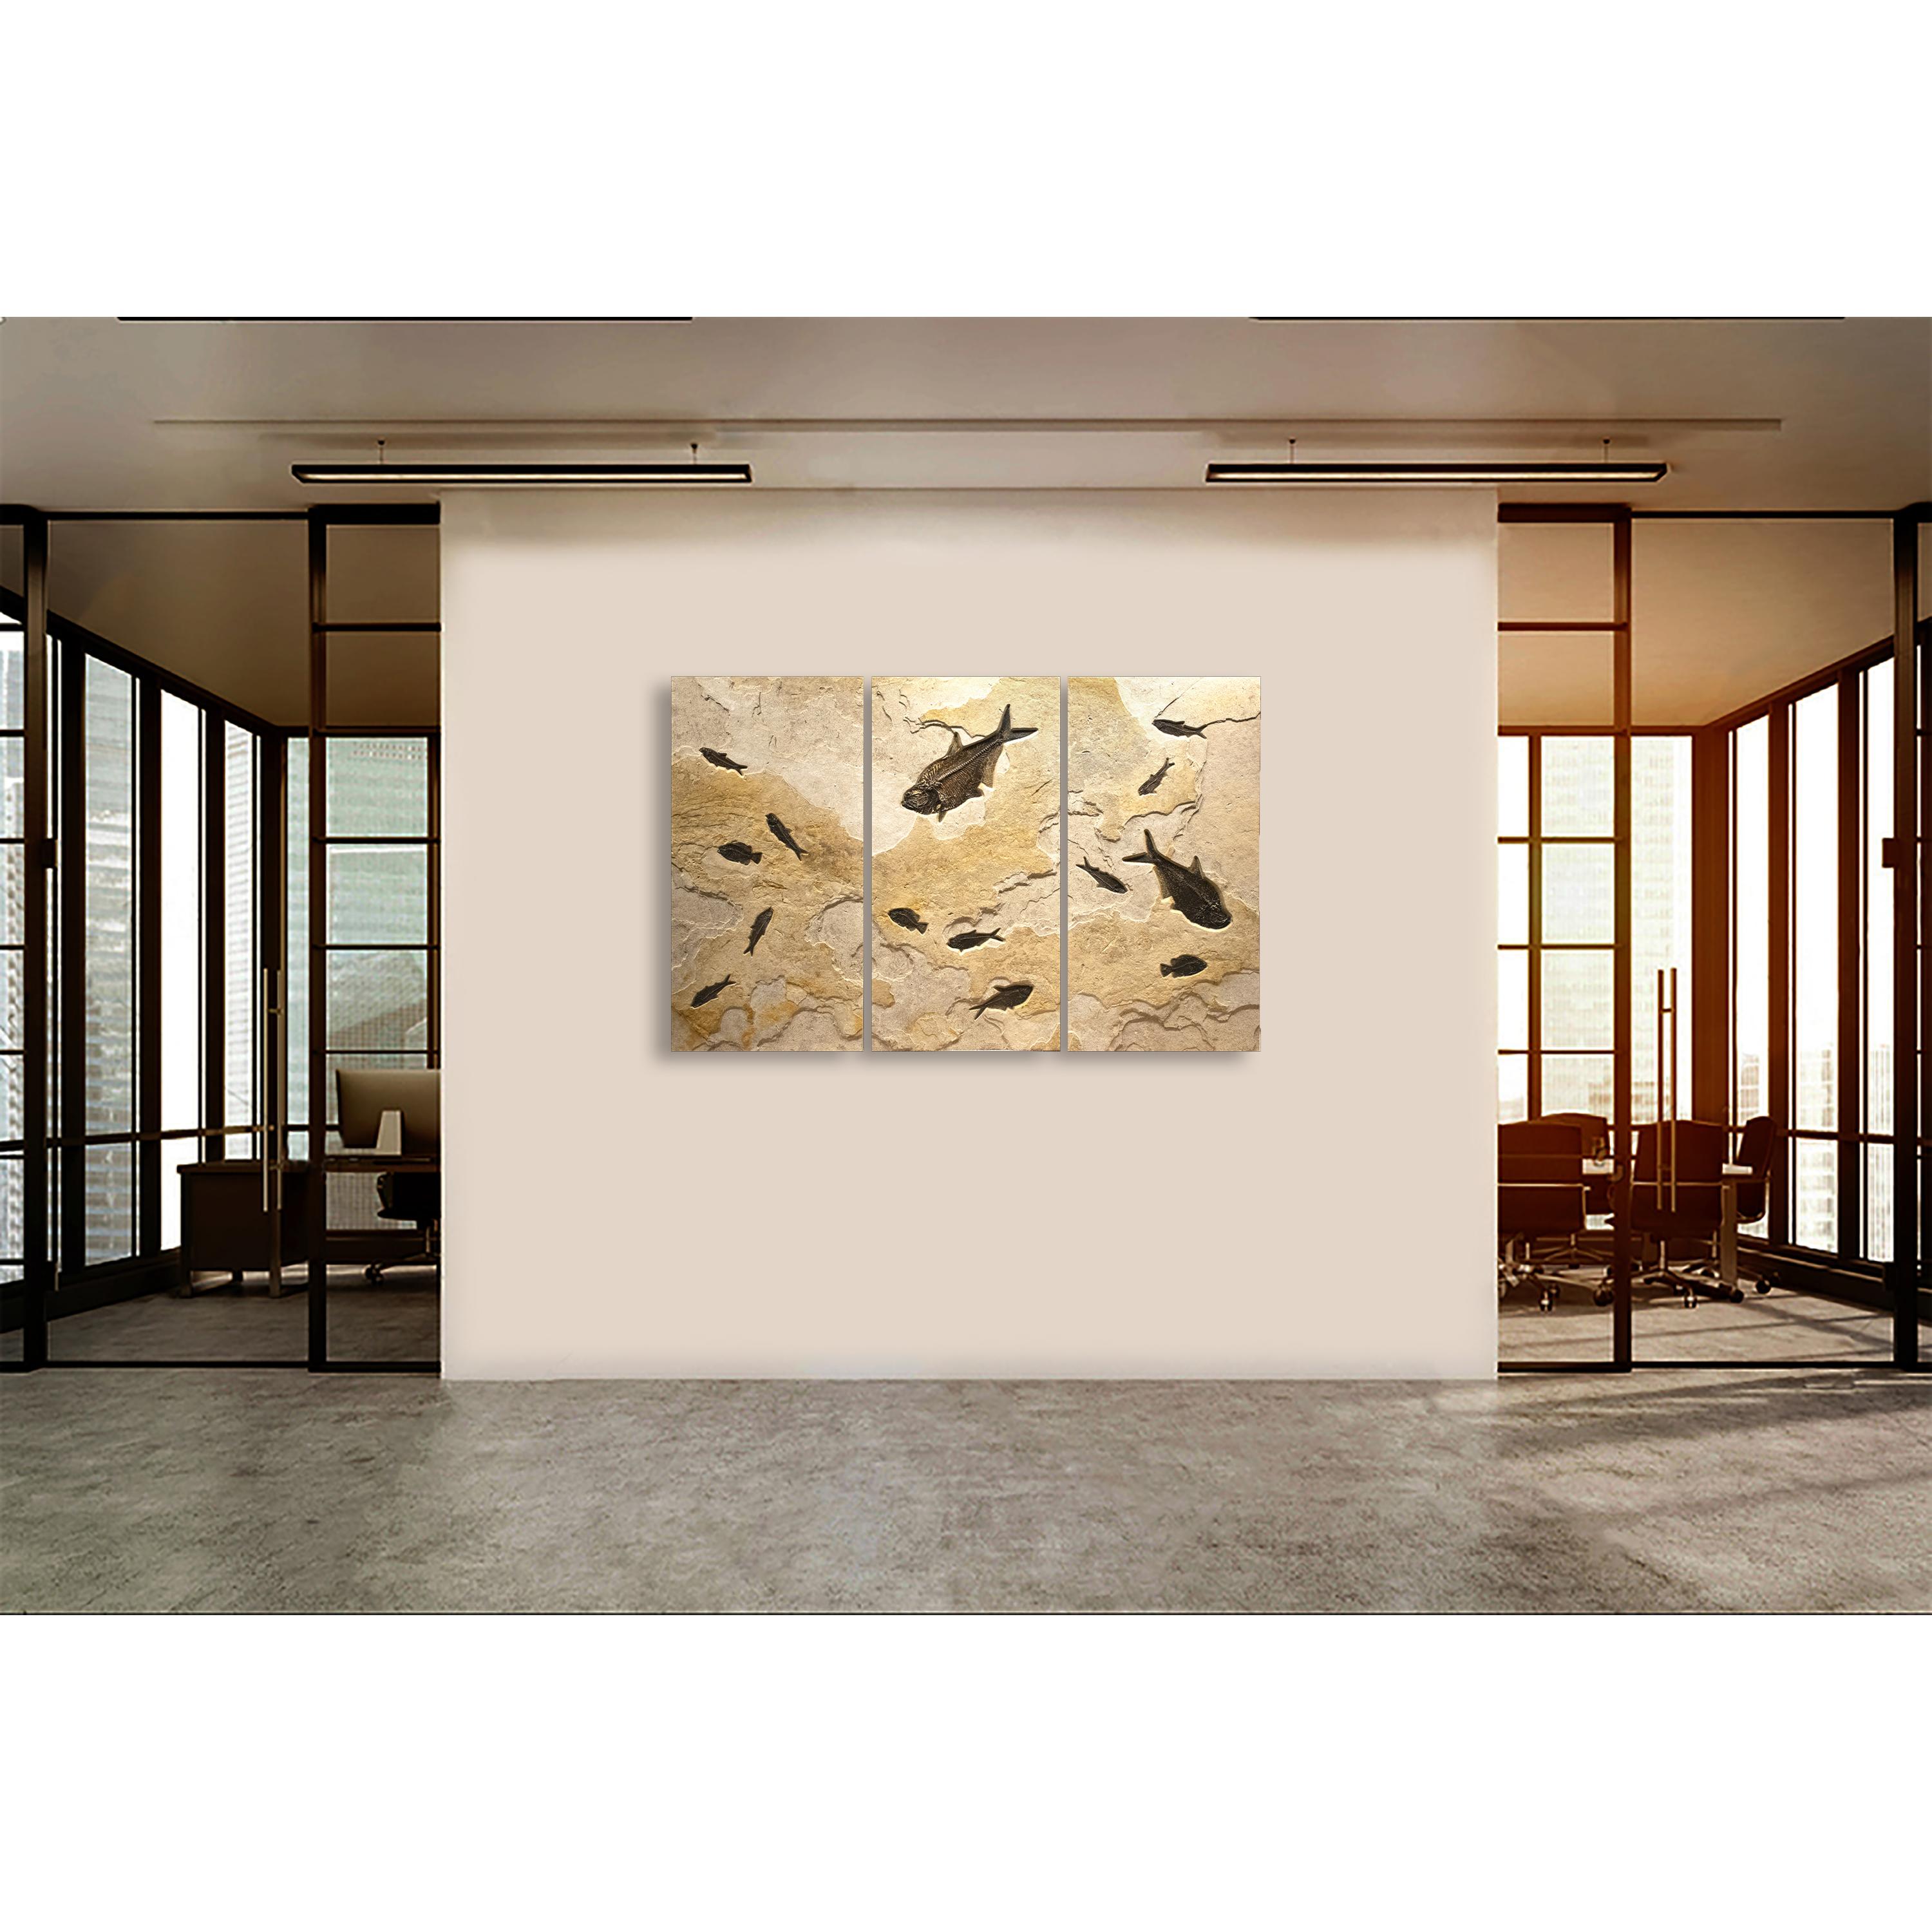 Our fossil triptych murals are designed for drama and impact. Featuring the gorgeous coloring of a sedimentary layer rich in volcanic ash, this fossil-bearing limestone matrix is a rich host for the genuine fossil fish swimming across all three